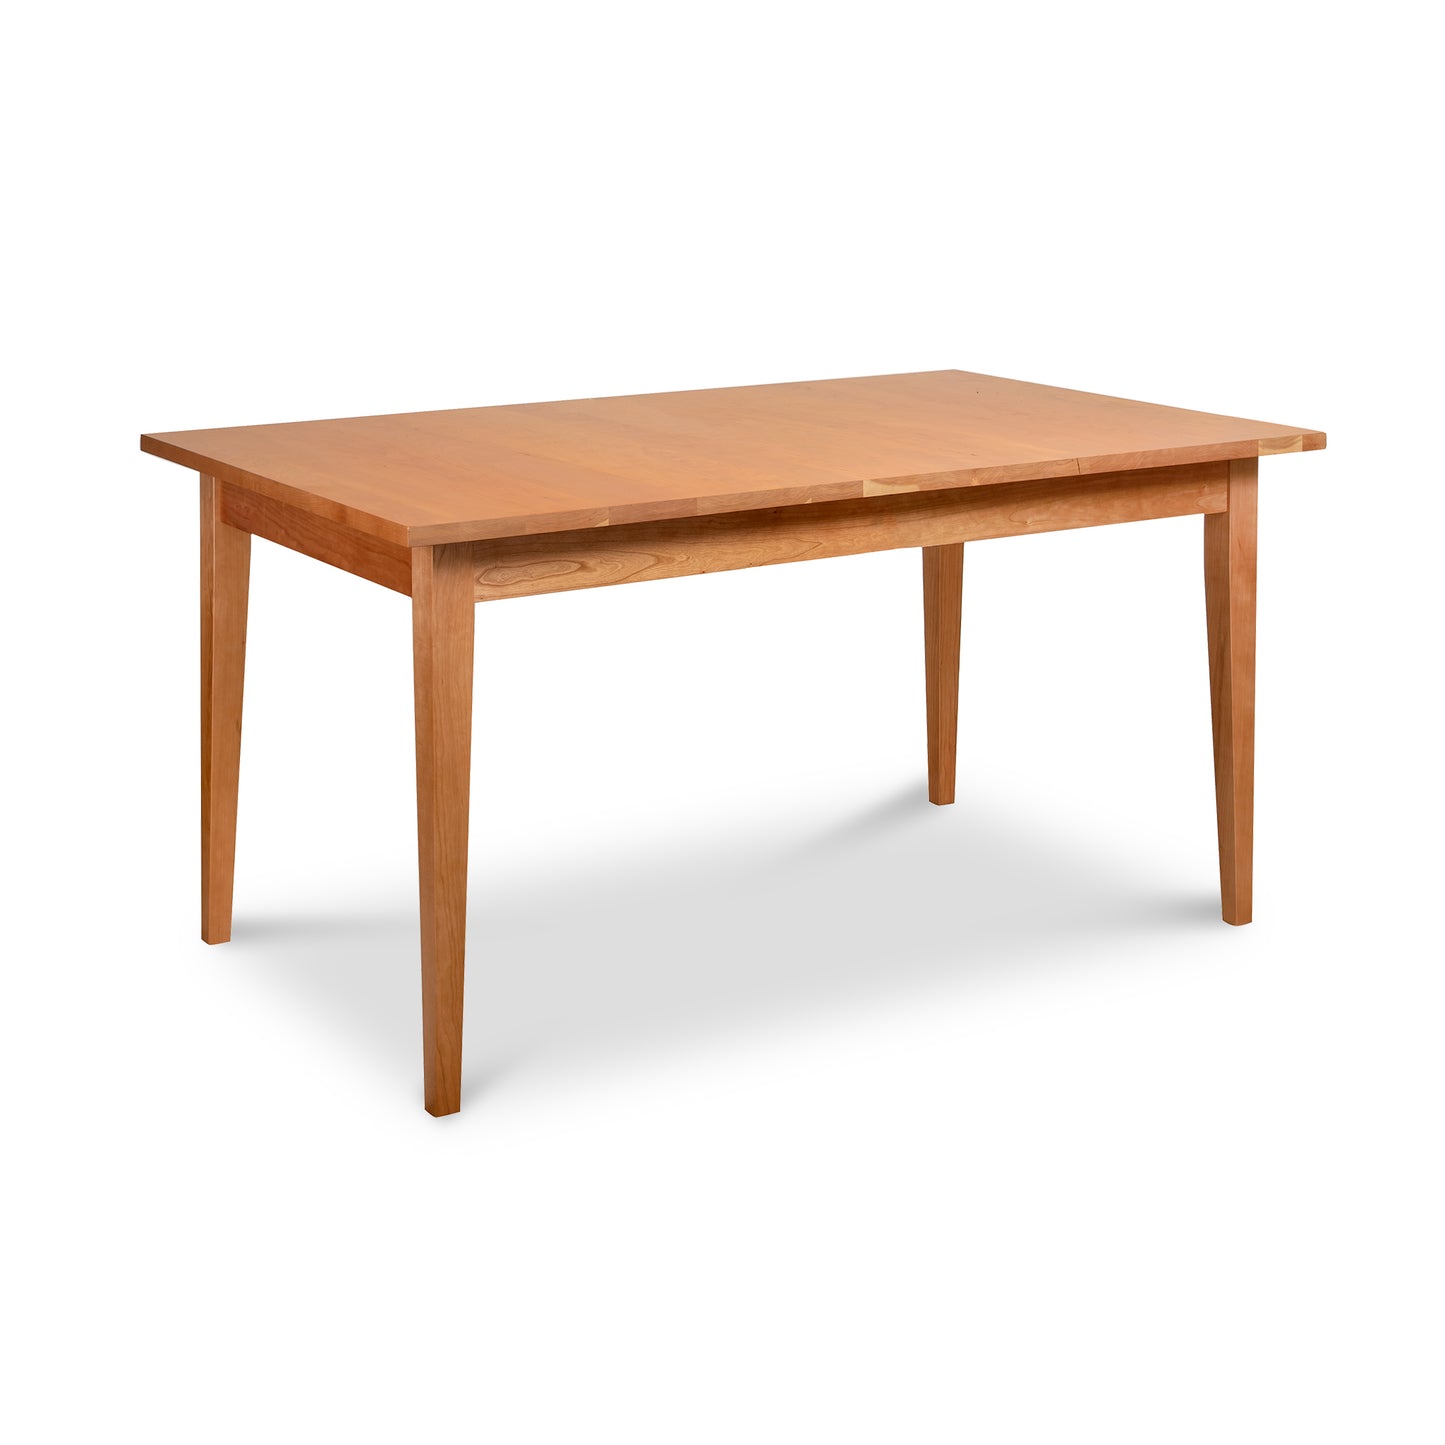 A Classic Shaker Solid Top Dining Table by Lyndon Furniture with two legs on a white background.